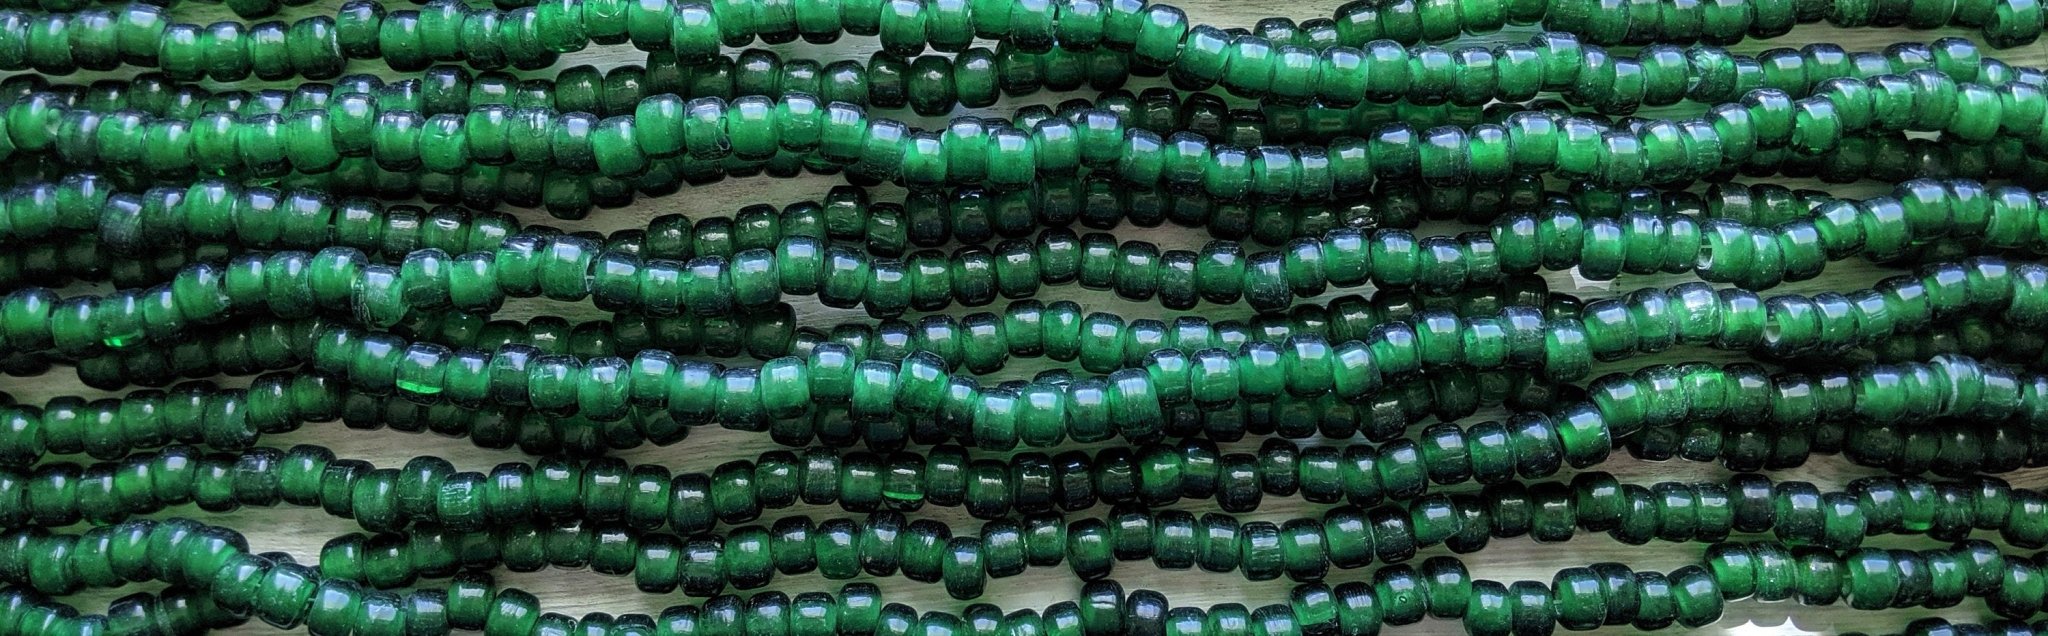 Transparent Dark Green - Size 9x6mm (3mm hole) Recycled Glass Crow Beads - 24 Inch Strand (ICB06) - Beads and Babble